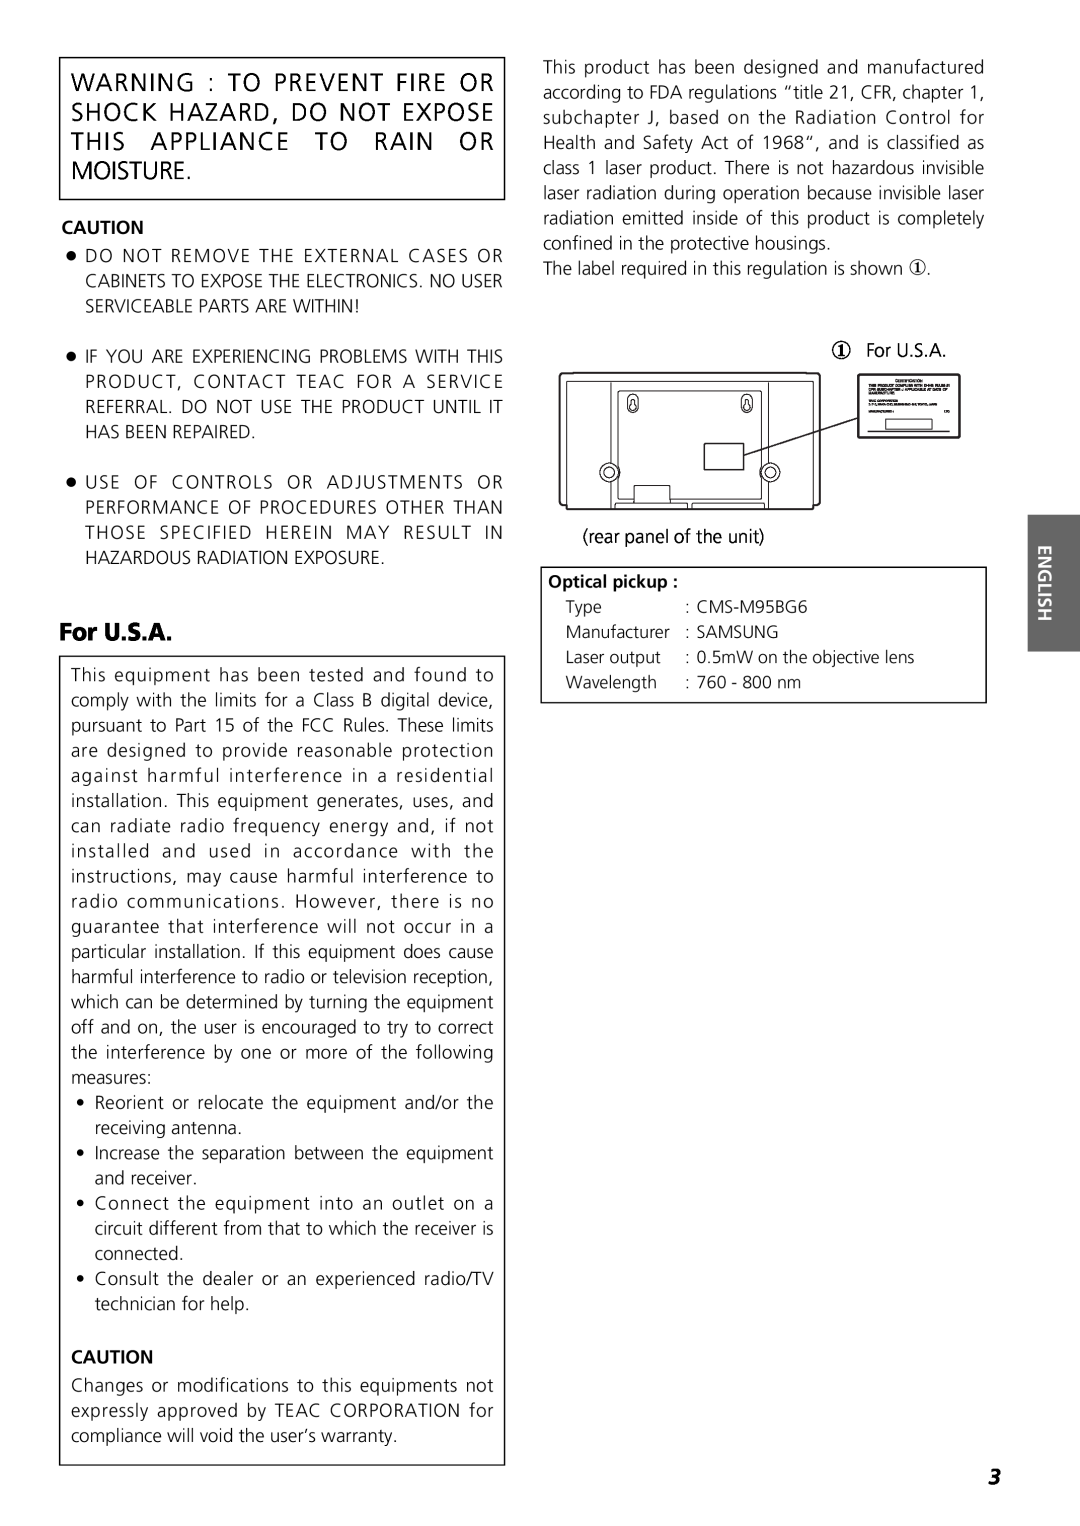 Teac SR-L35CD owner manual For U.S.A, English 